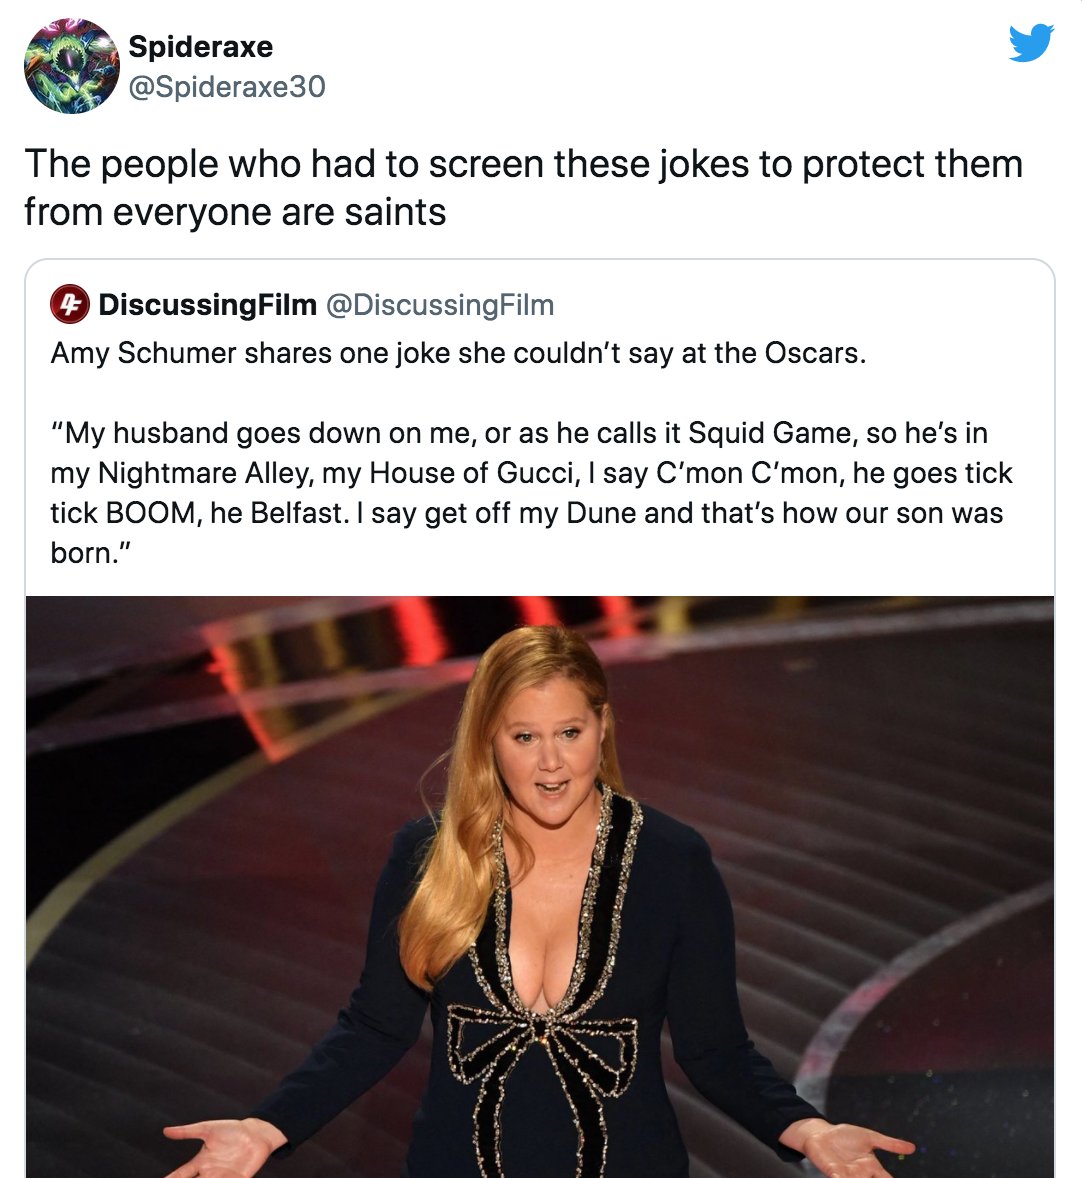 Amy Schumer Oscars Joke - amy schumer -  The people who had to screen these jokes to protect them from everyone are saints Discussing Film Film Amy Schumer one joke she couldn't say at the Oscars. "My husband goes down on me, or as he calls it Squid Game,